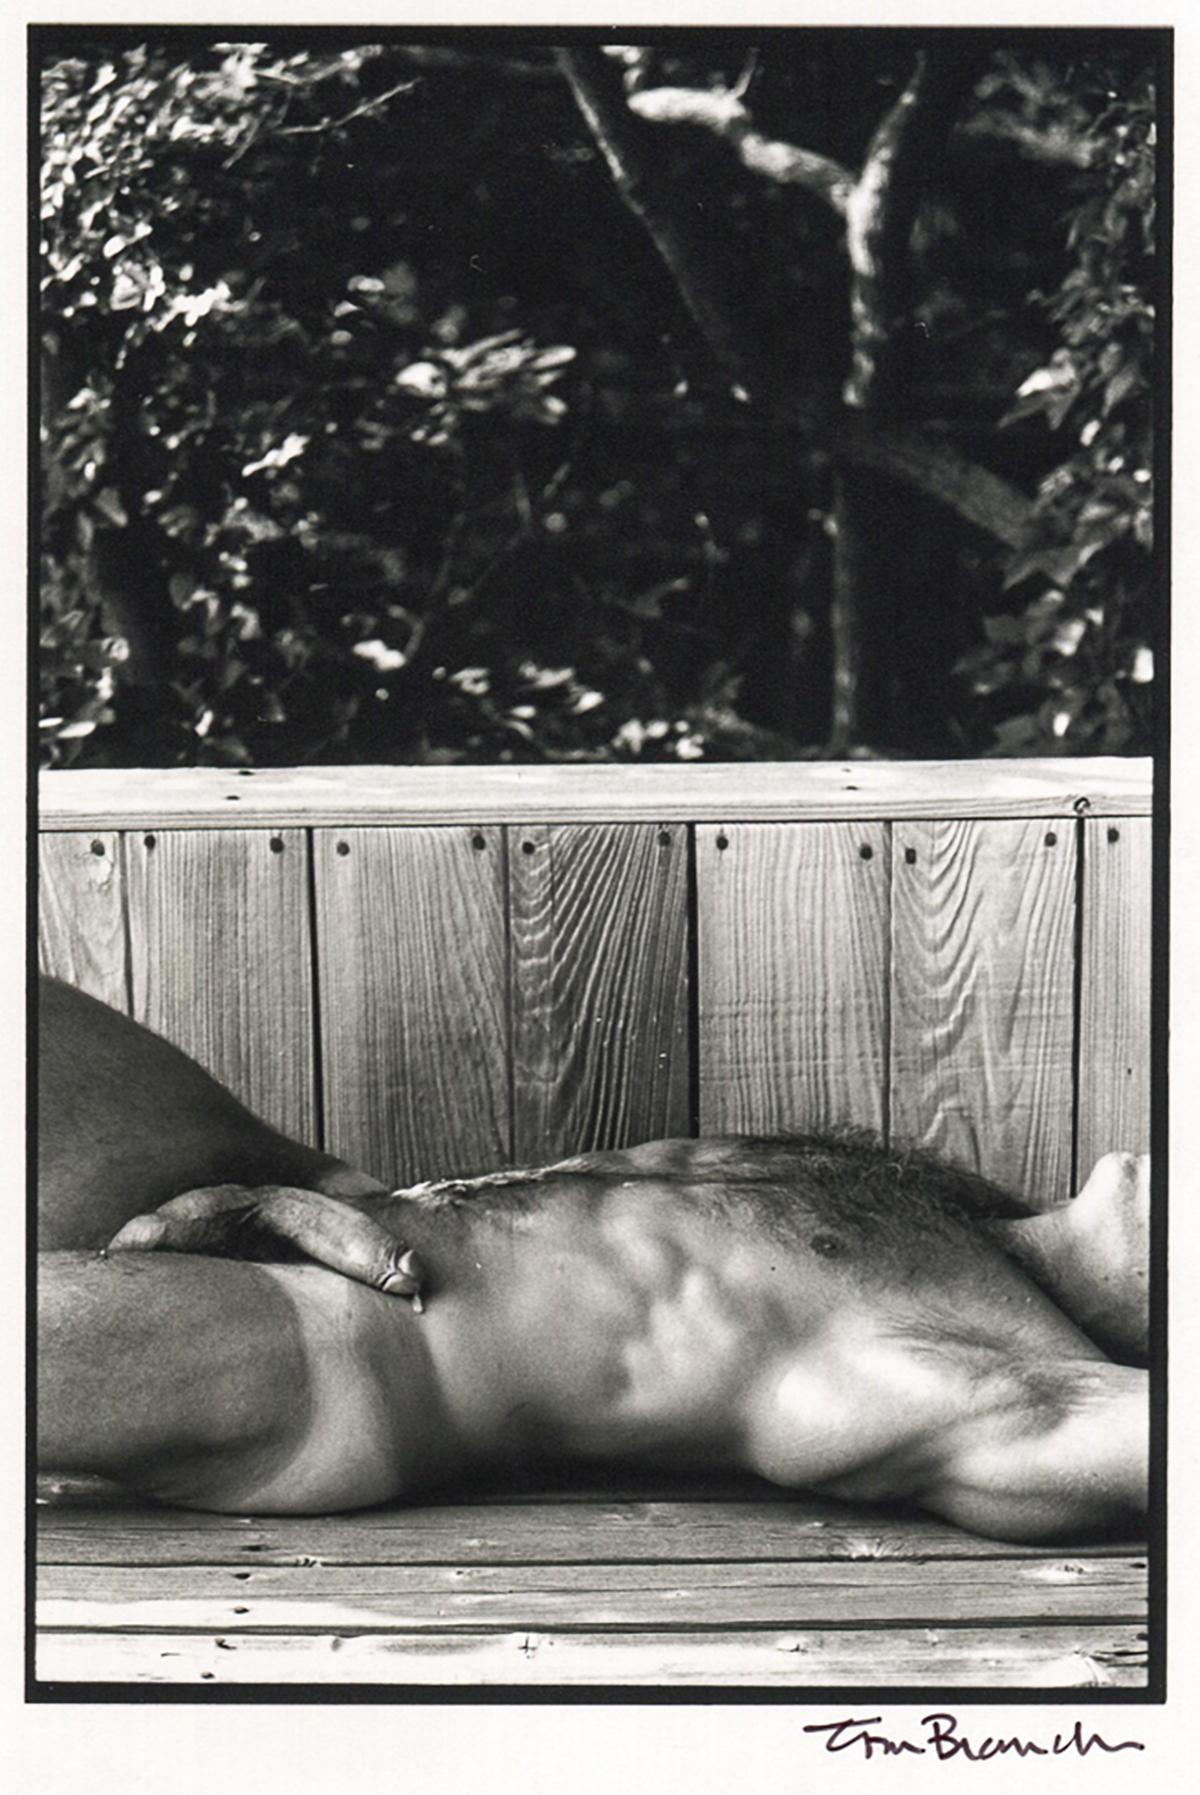 Tom Bianchi Black and White Photograph - Untitled (Reclining Male Nude on Deck)